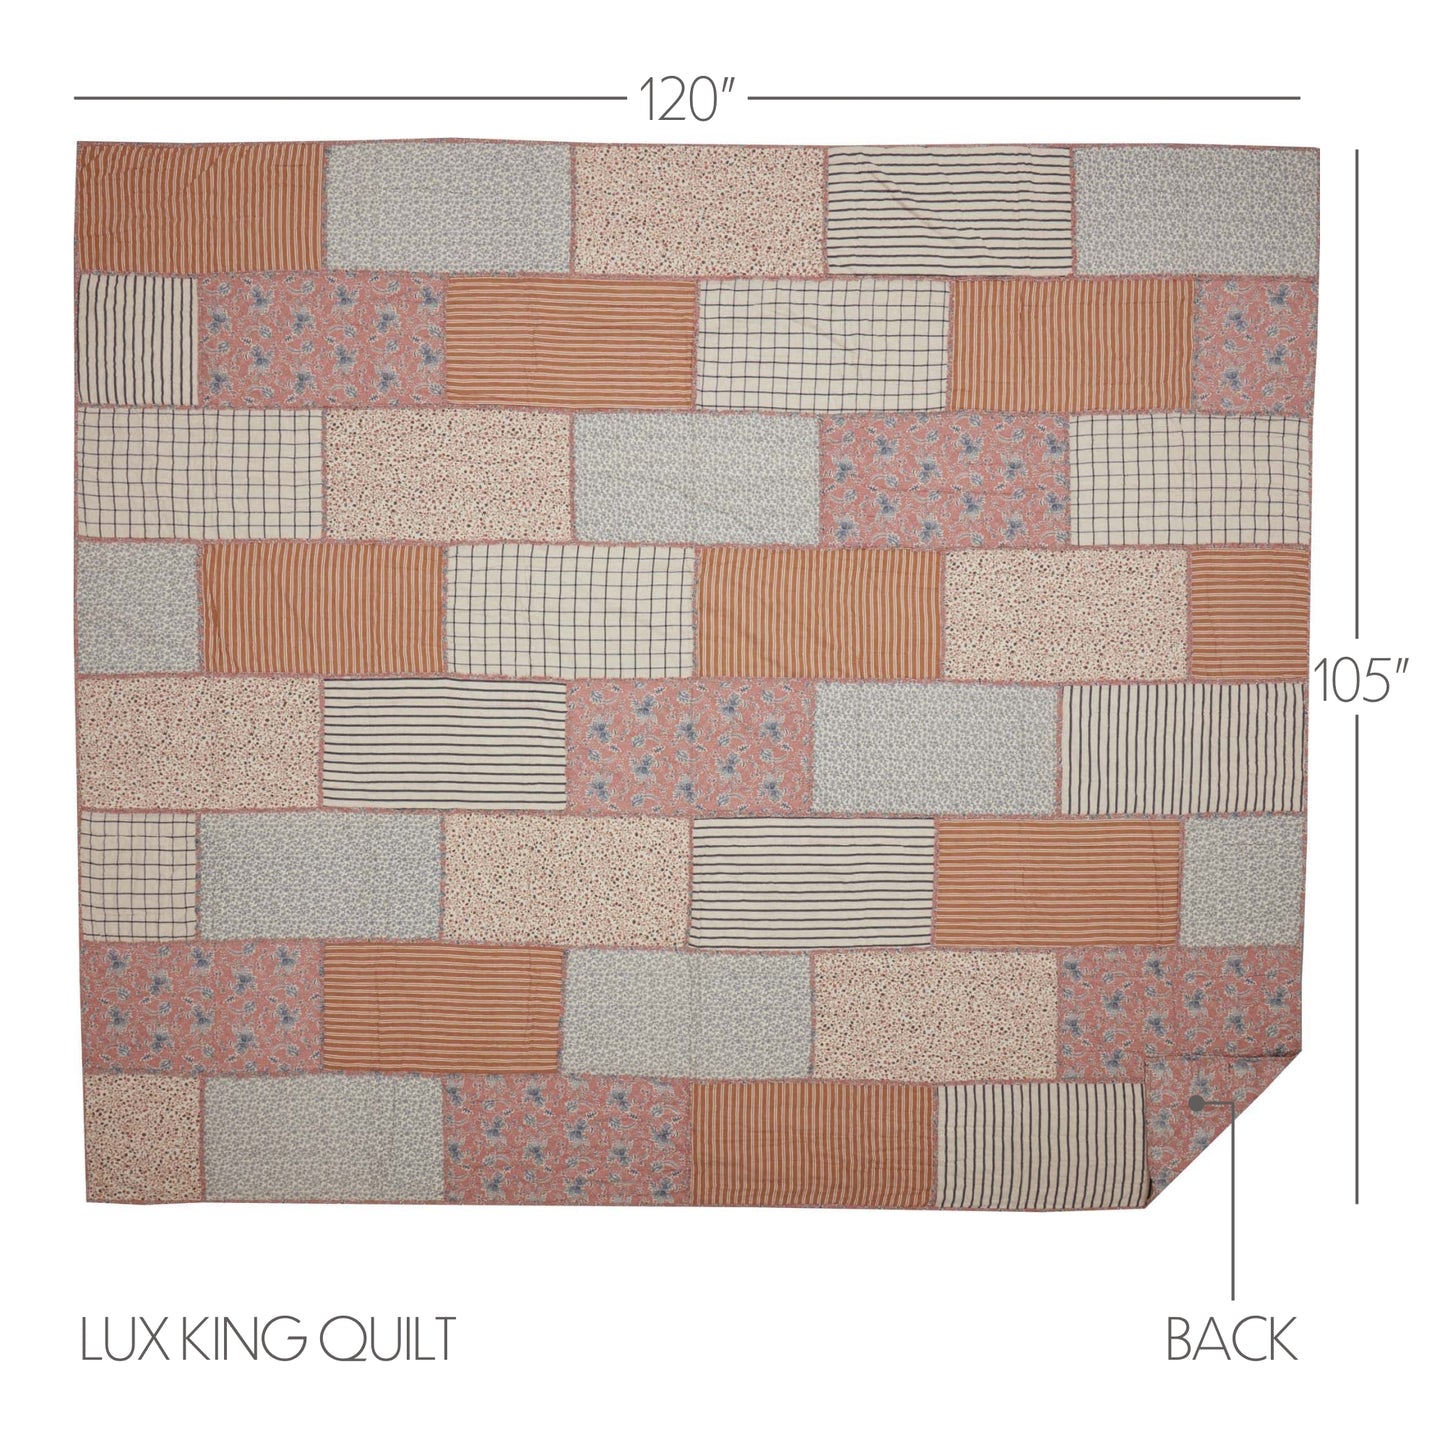 70127-Kaila-Luxury-King-Quilt-120Wx105L-image-7